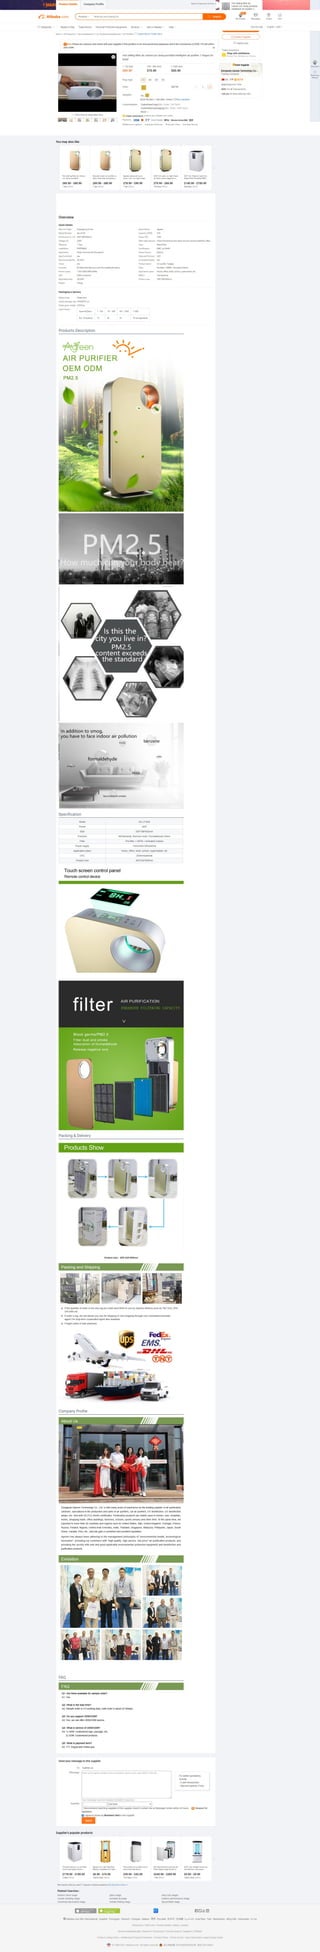 Hot selling filter air carbon uvc lamp portable intelligent air purifier